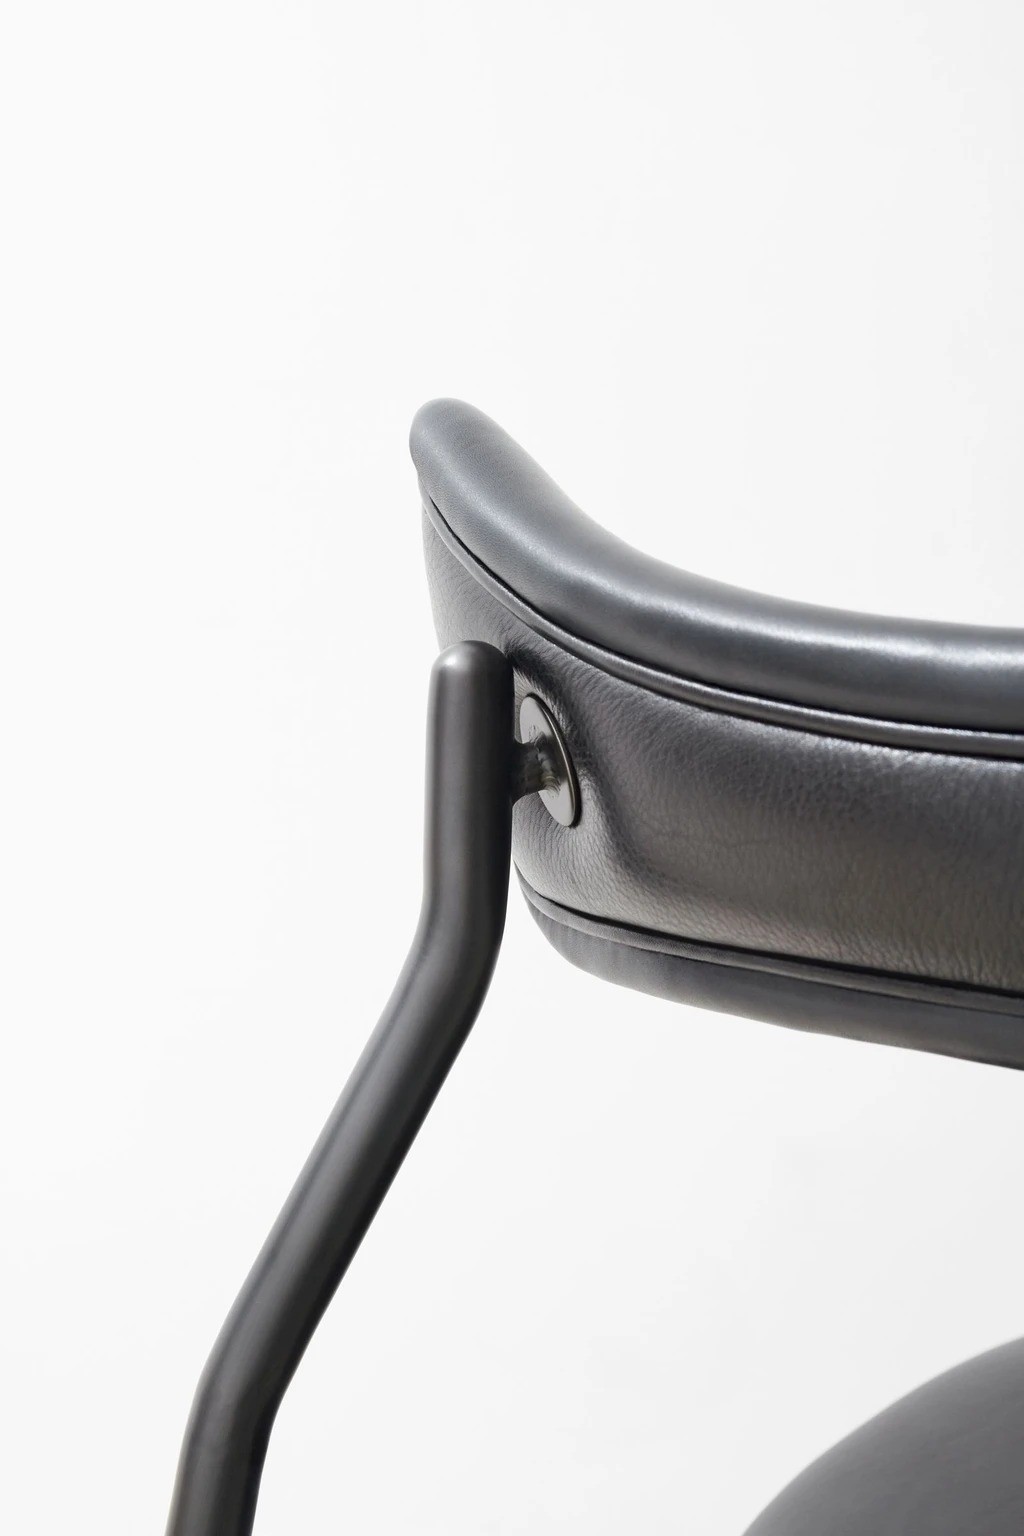 【Archetypal】Dragonfly Dining Chair | District Eight Chair in HK